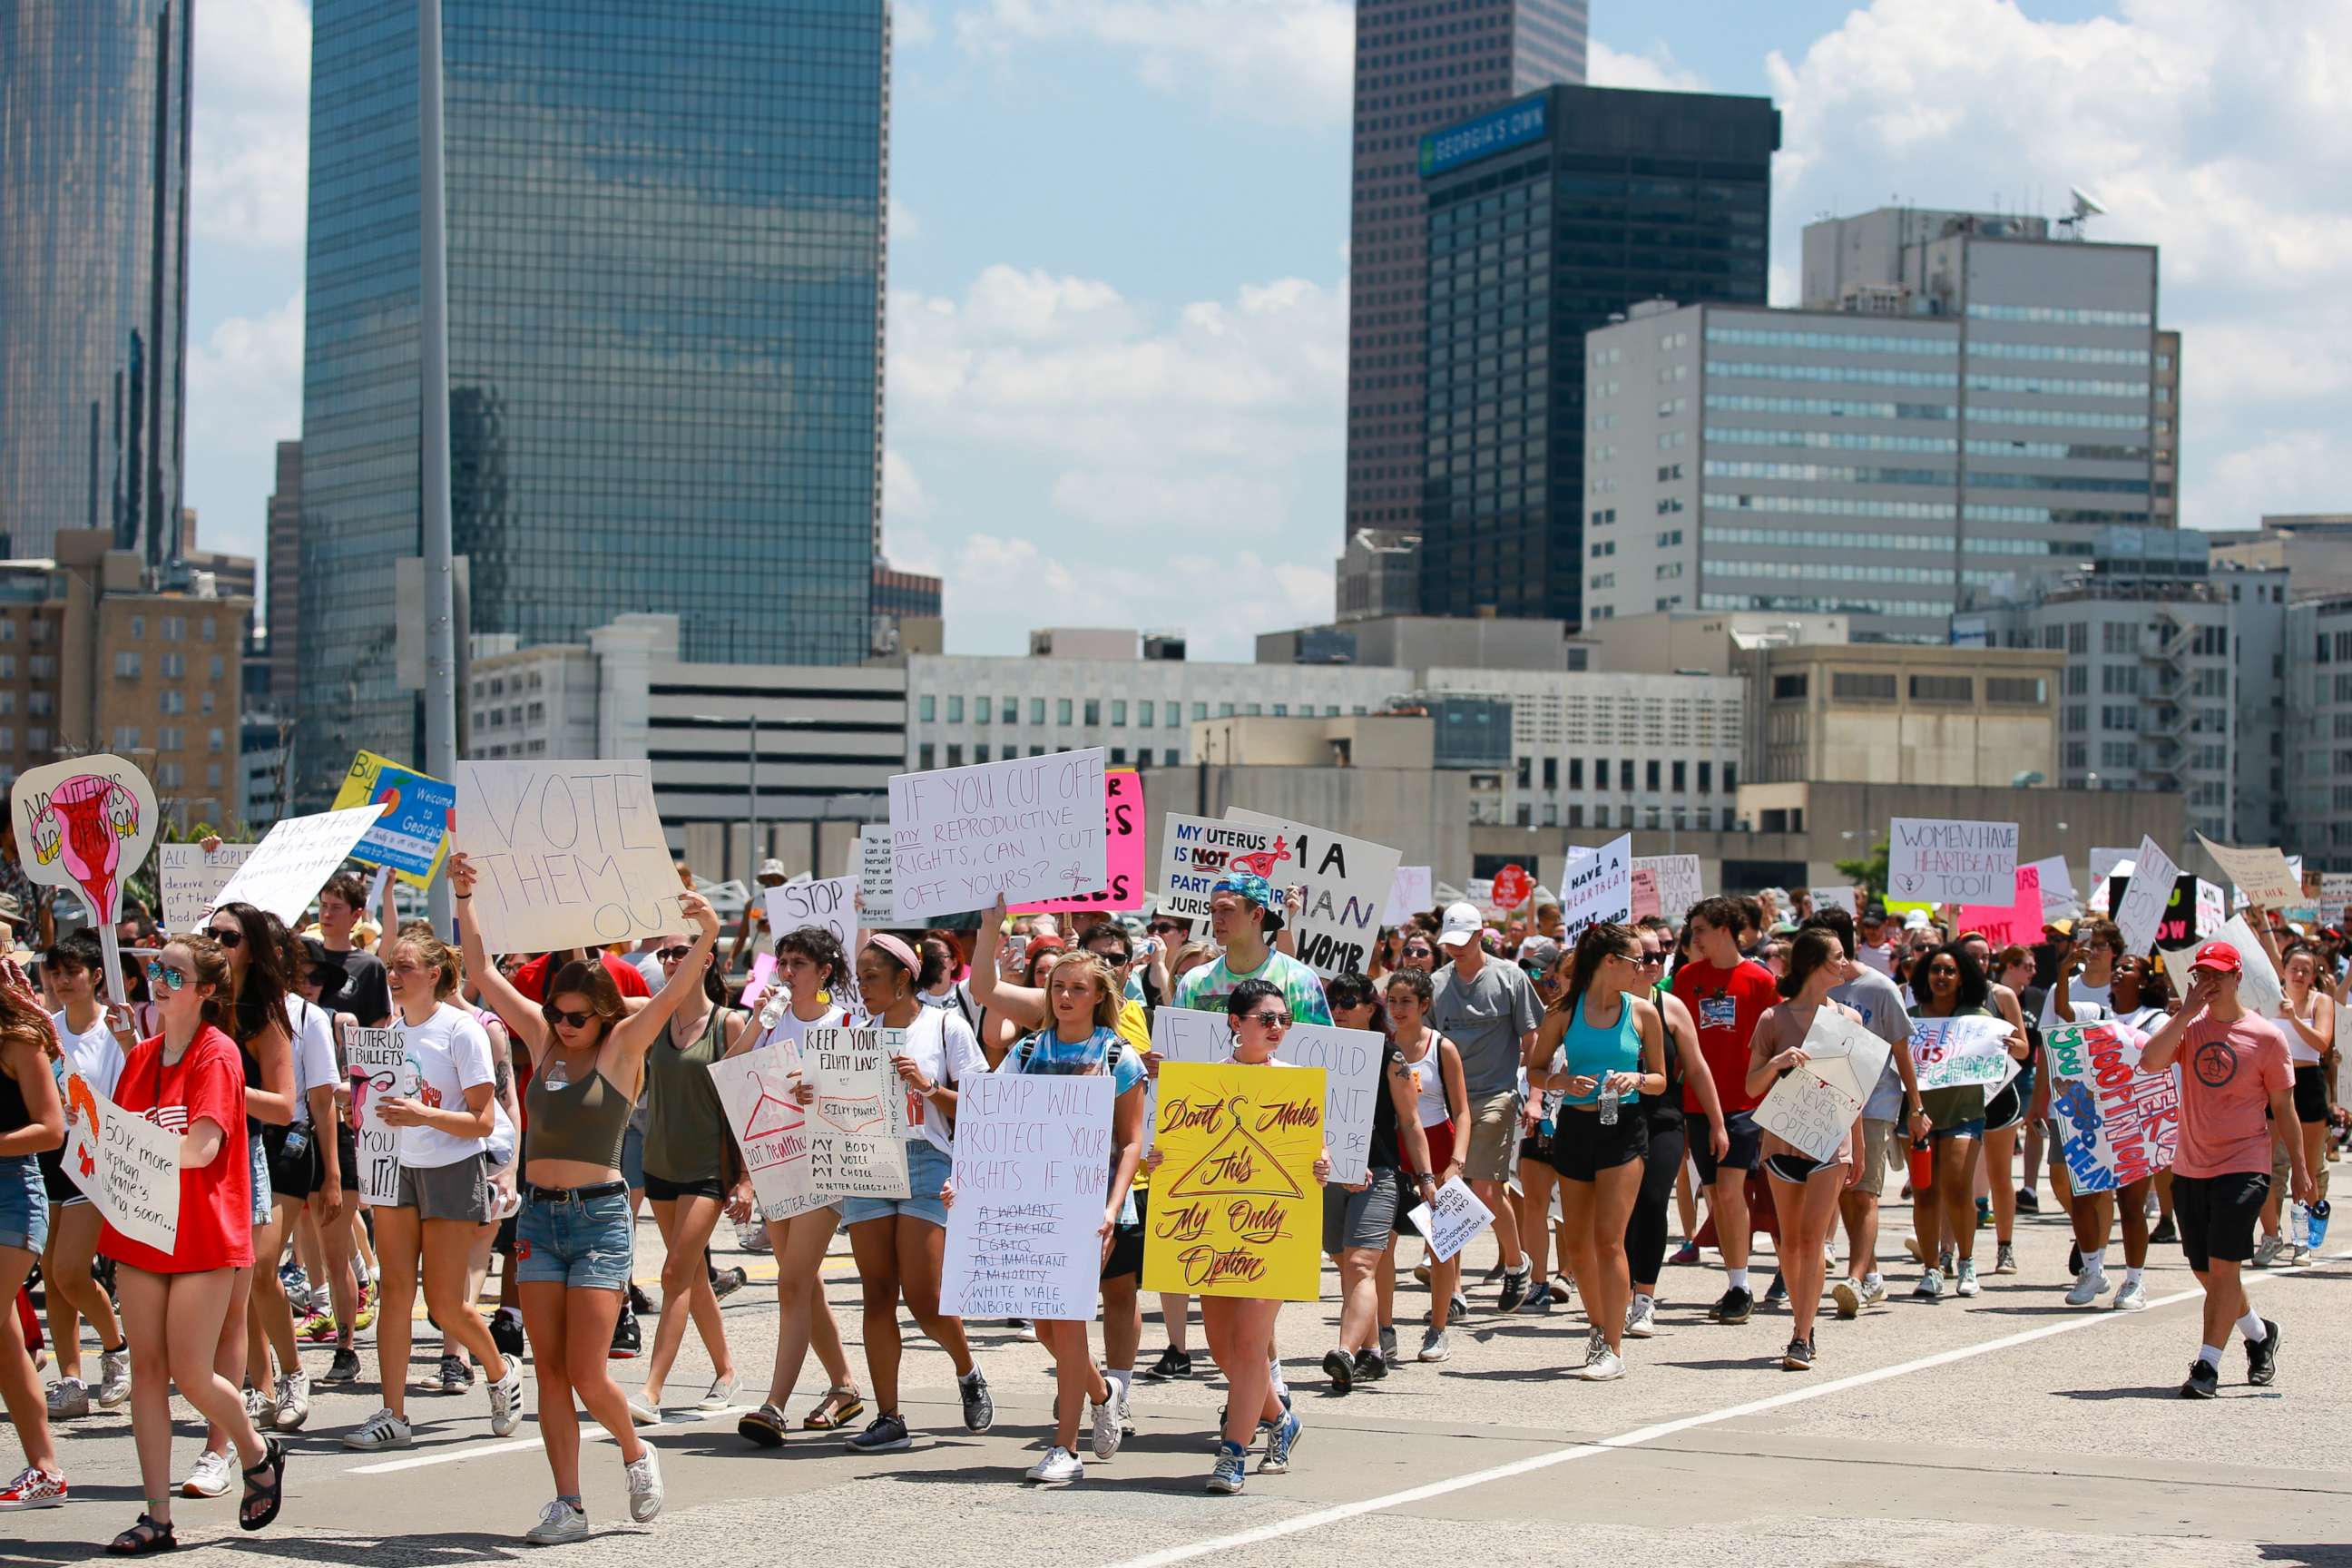 PHOTO: Demonstrators hold signs while marching during a protest against Georgia's "heartbeat" abortion bill in Atlanta, May 25, 2019.